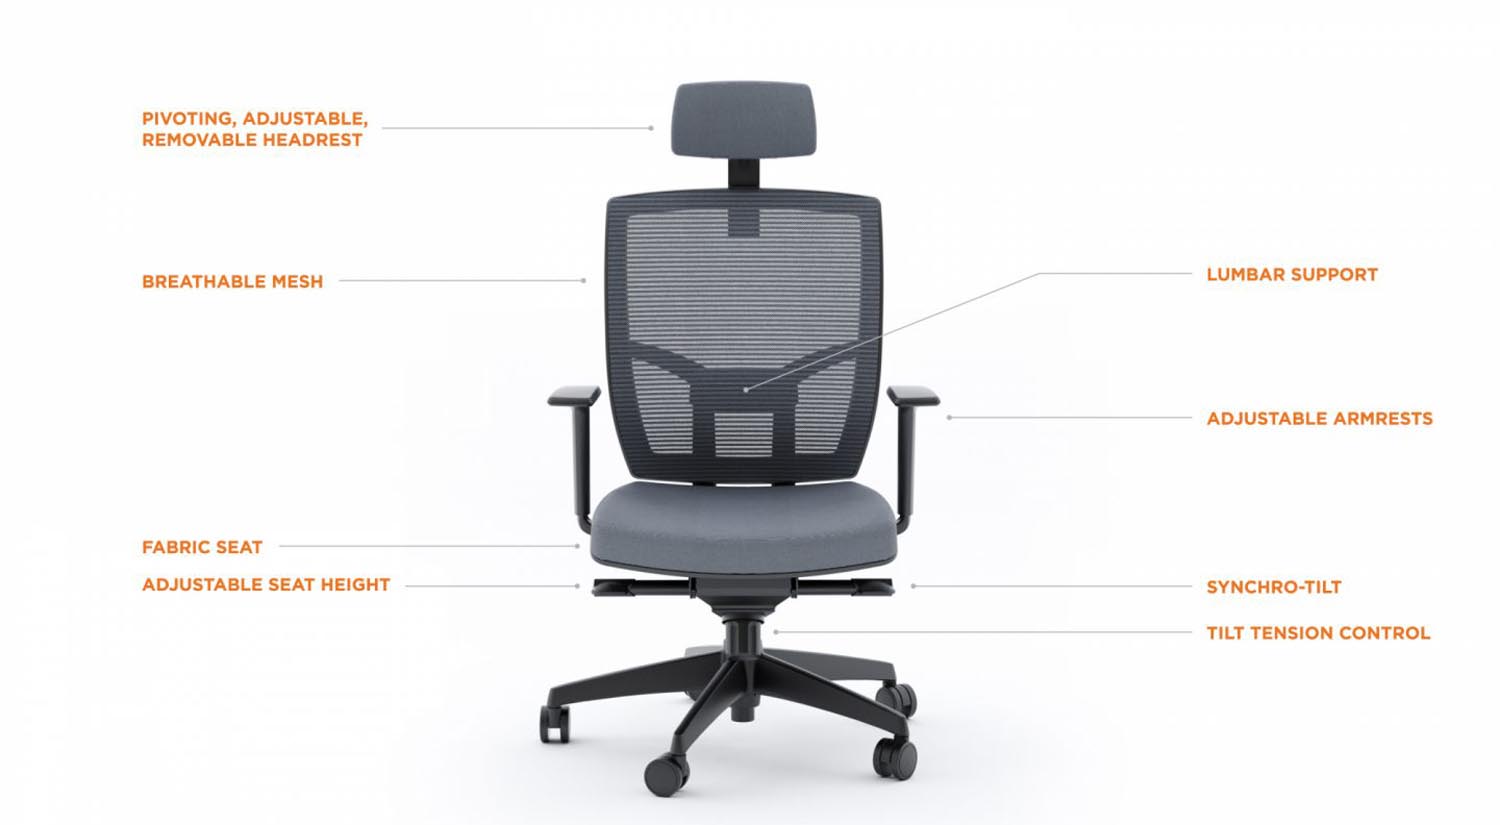 https://www.circlefurniture.com/userfiles/images/Products/bdi/task-chair/BDI-TC223DHF-features-2x-main.jpg